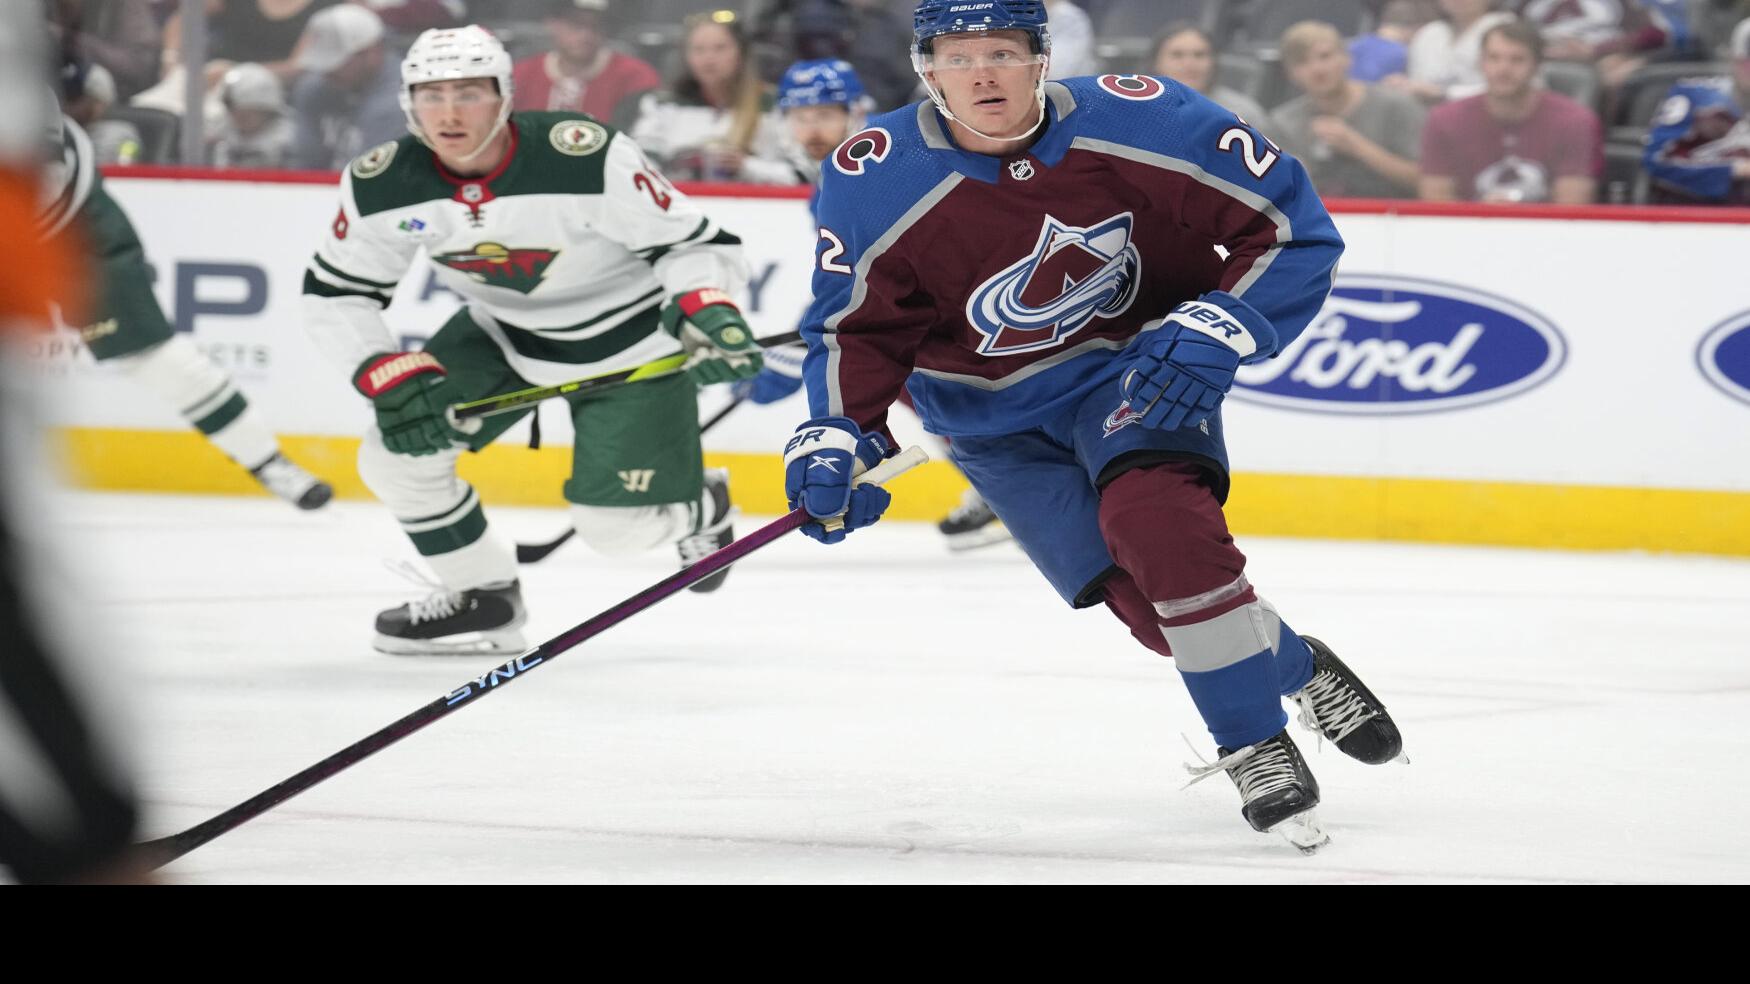 Avalanche's Fredrik Olofsson impressing in his adopted hometown